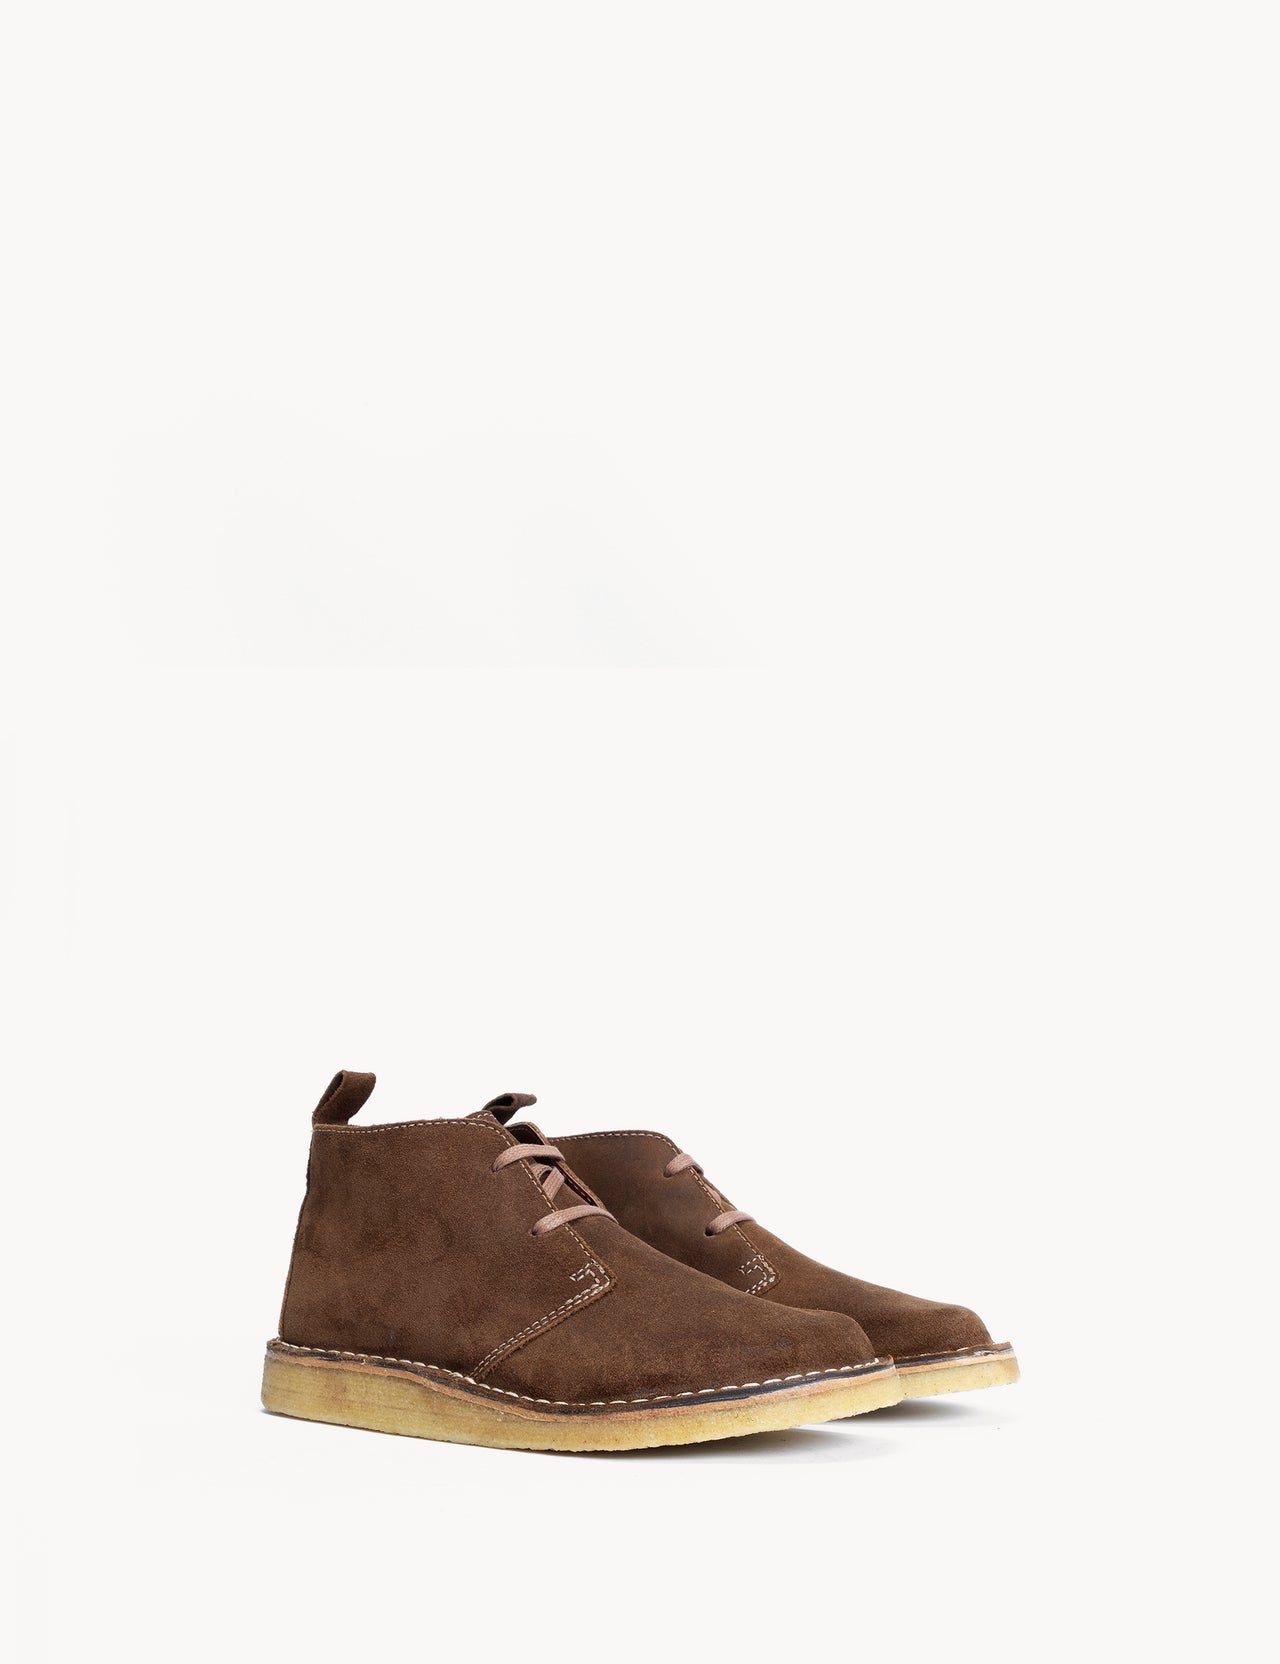 Silja In Cognac Waxed Suede With a Crepe Sole